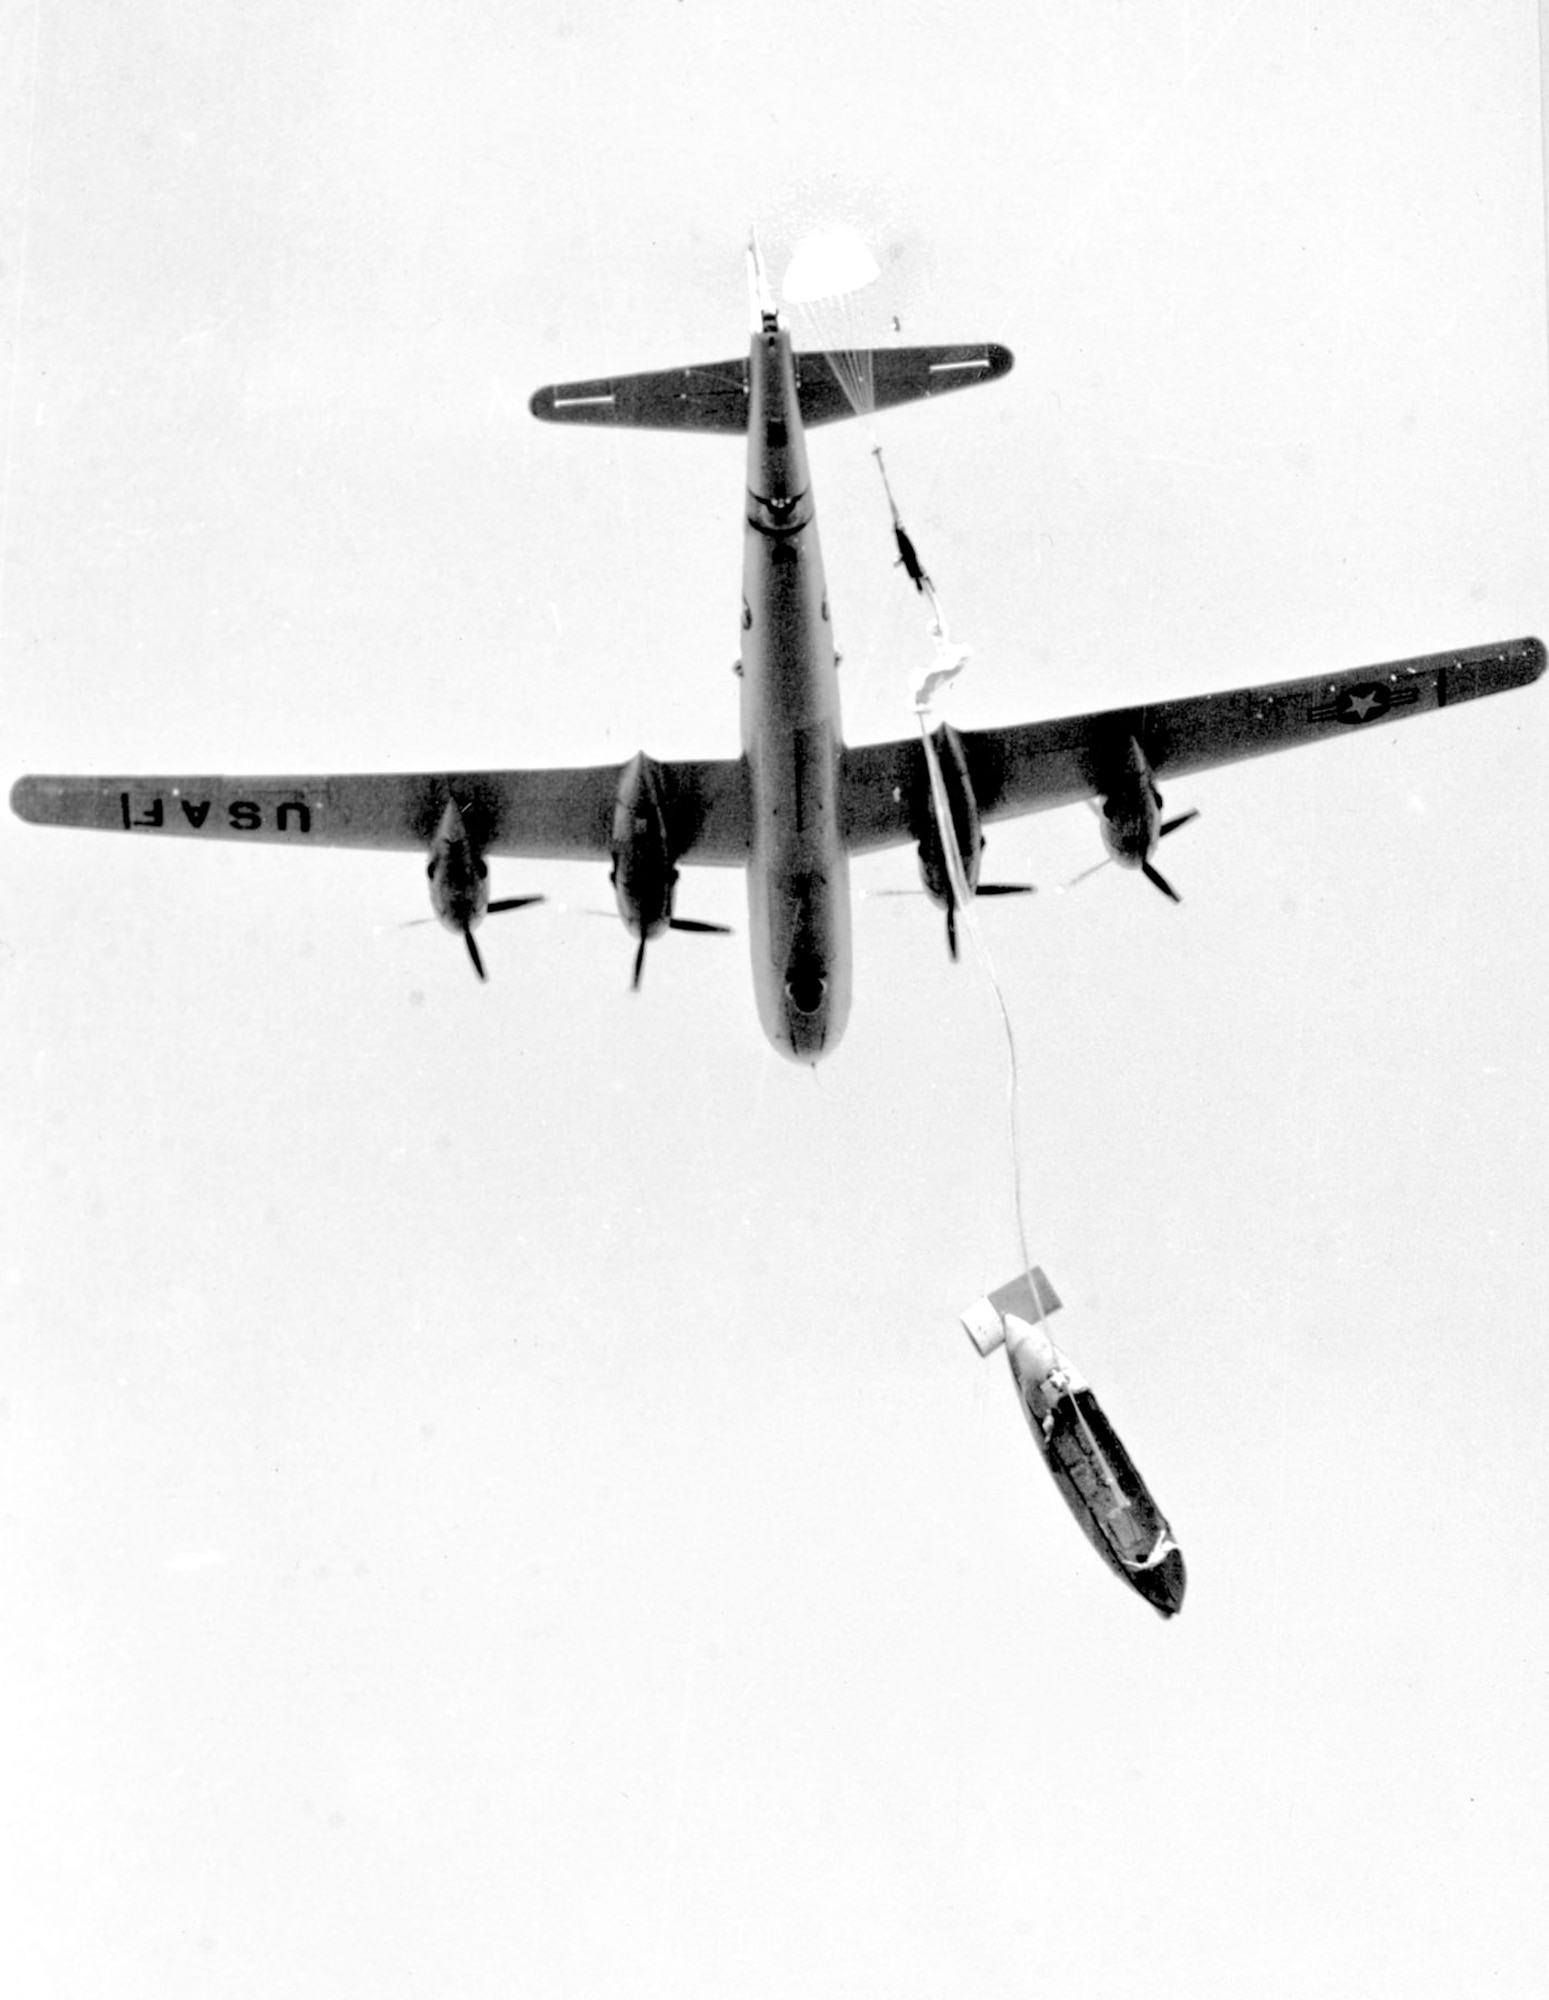 As the lifeboat falls away, a small drogue parachute opens the main parachute. (U.S. Air Force)